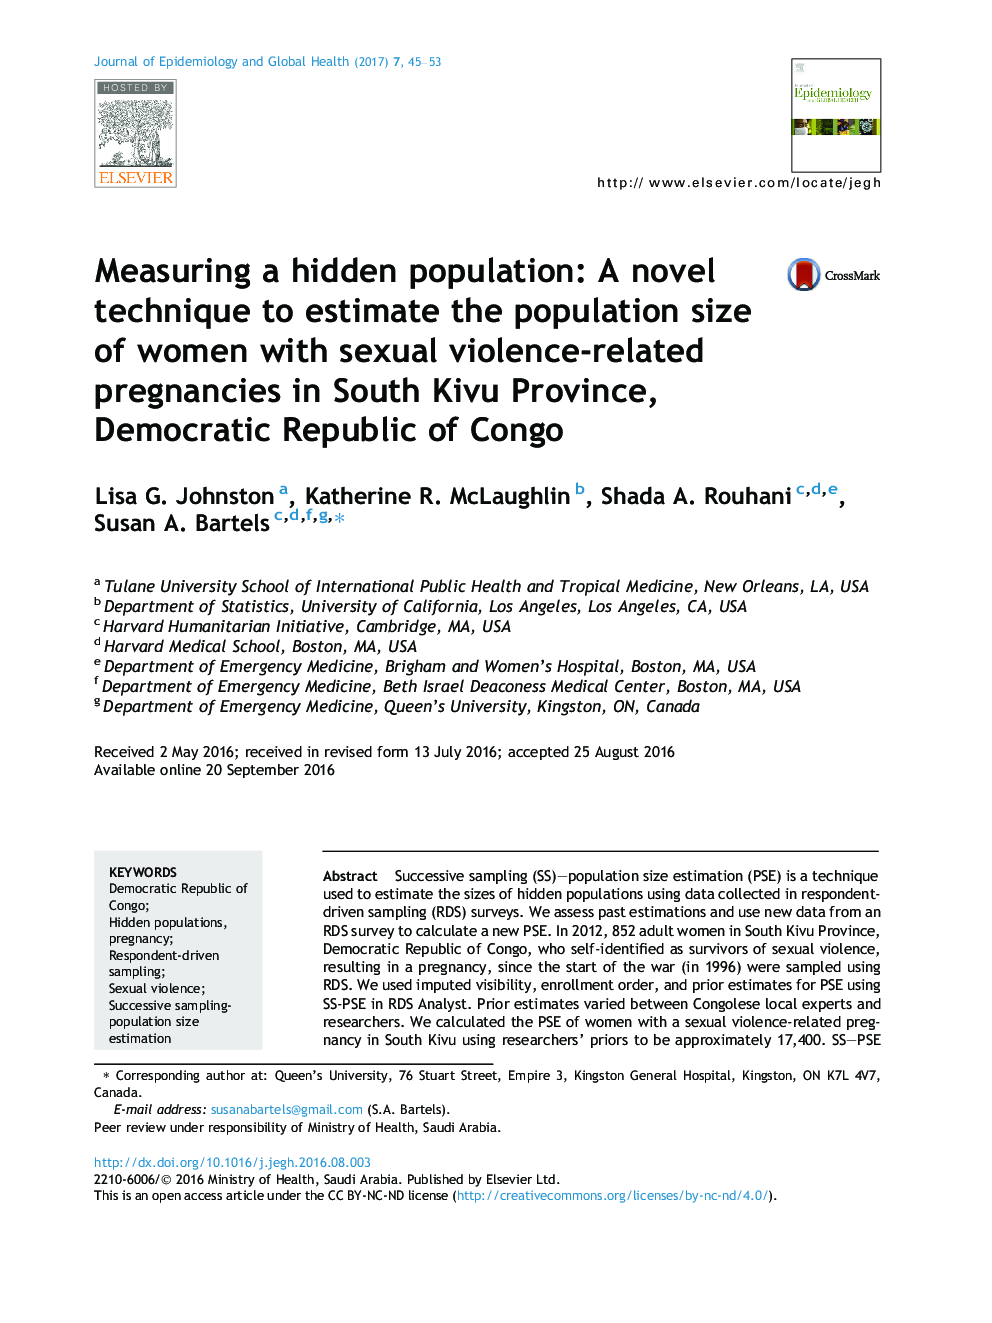 Measuring a hidden population: A novel technique to estimate the population size of women with sexual violence-related pregnancies in South Kivu Province, Democratic Republic of Congo